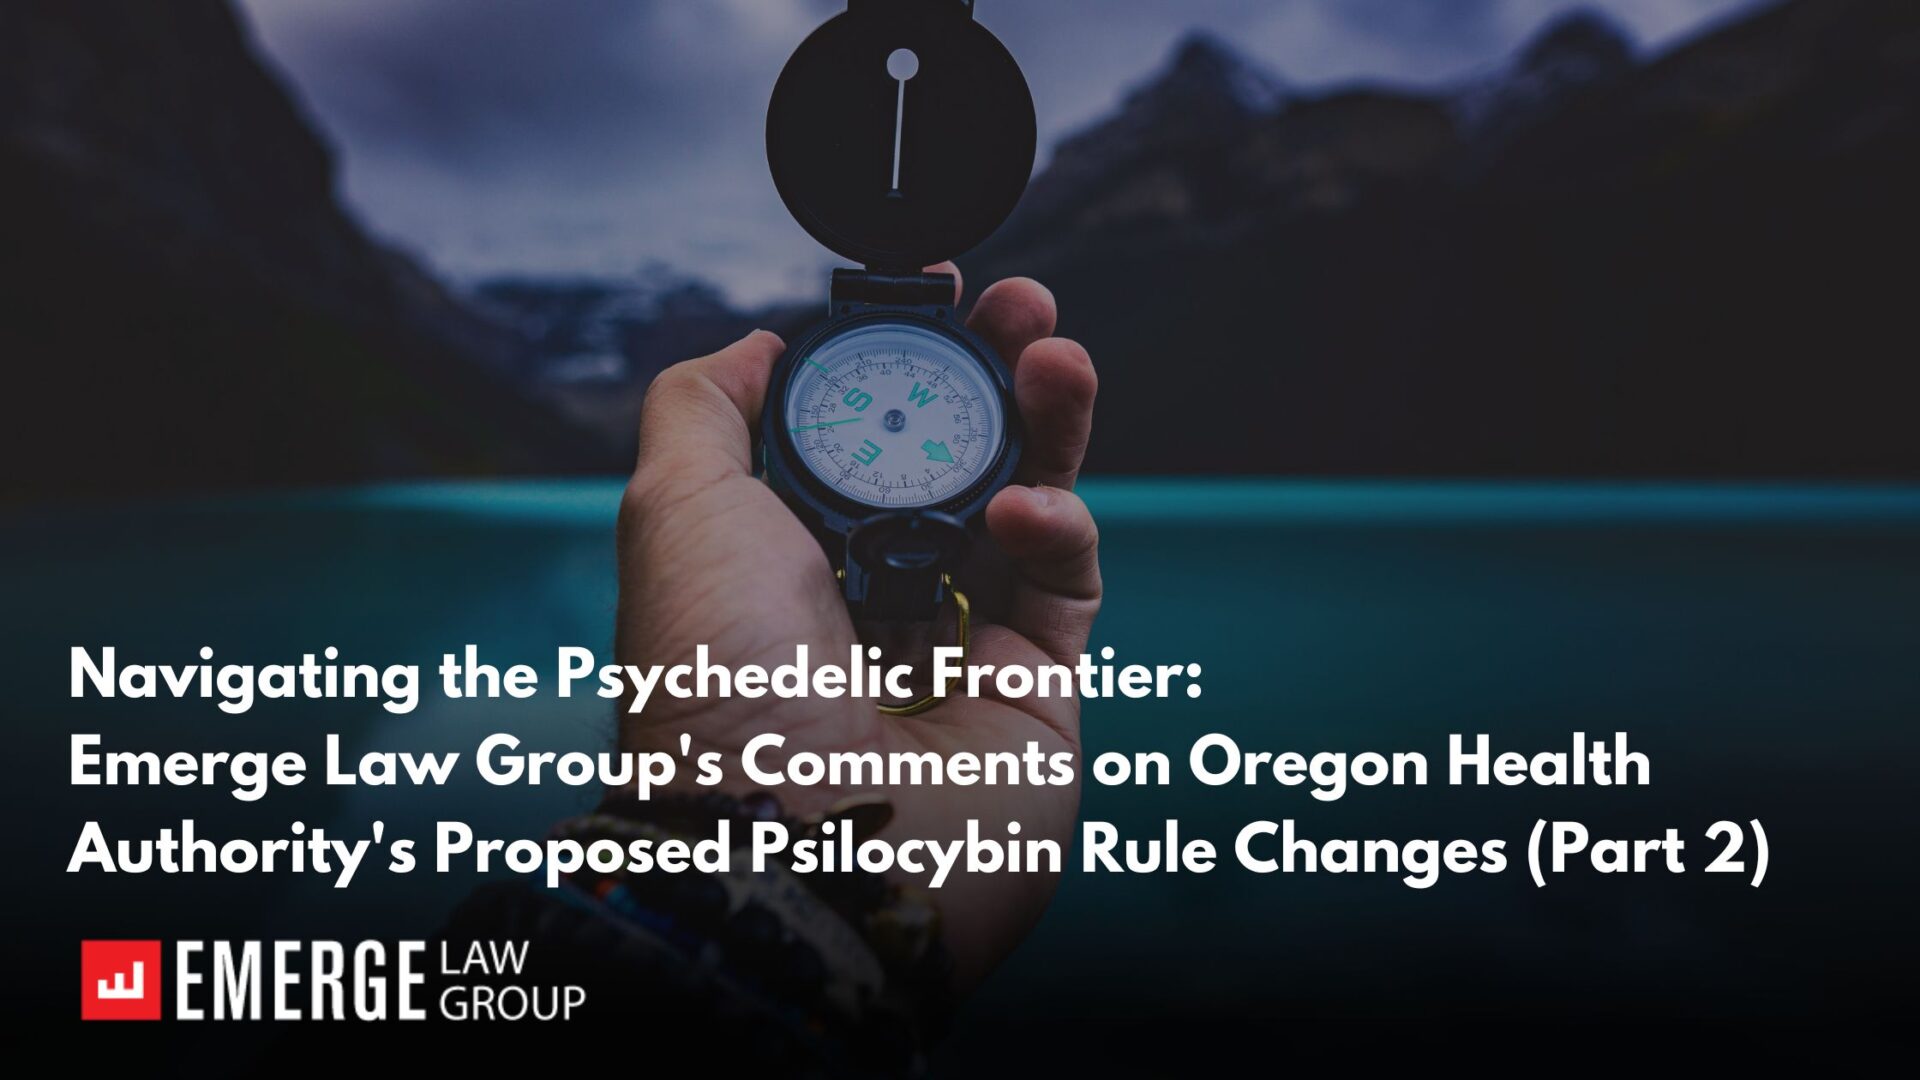 Navigating the Psychedelic Frontier: Emerge Law Group’s Comments on Oregon Health Authority’s Proposed Psilocybin Rule Changes (Part 2)